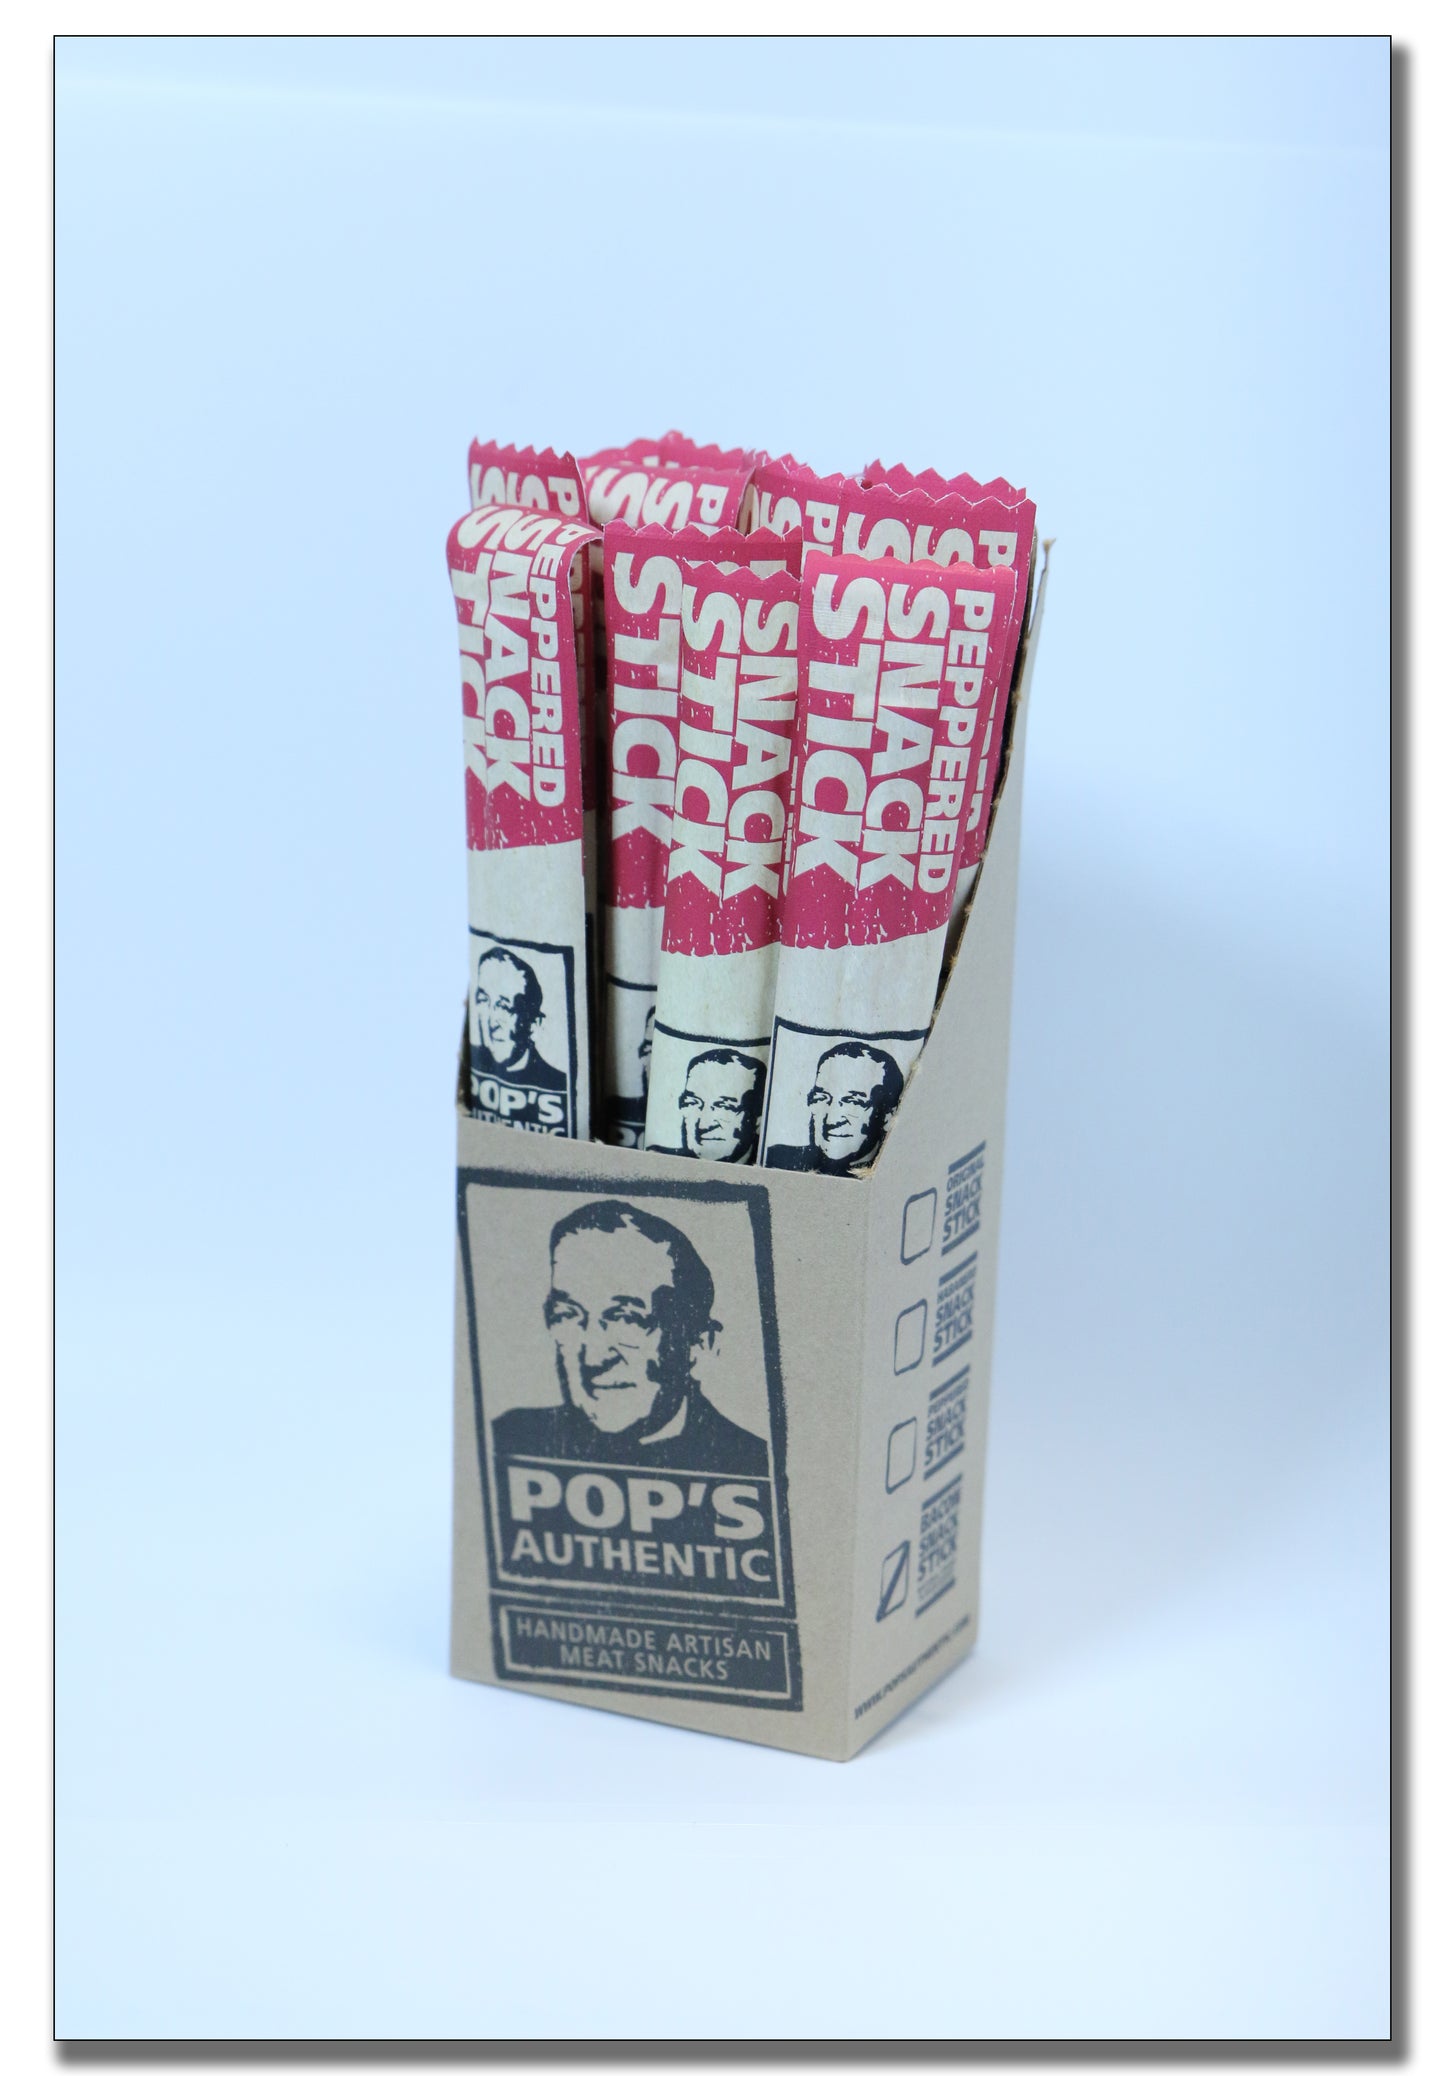 Peppered Snack Sticks packaged in a display box